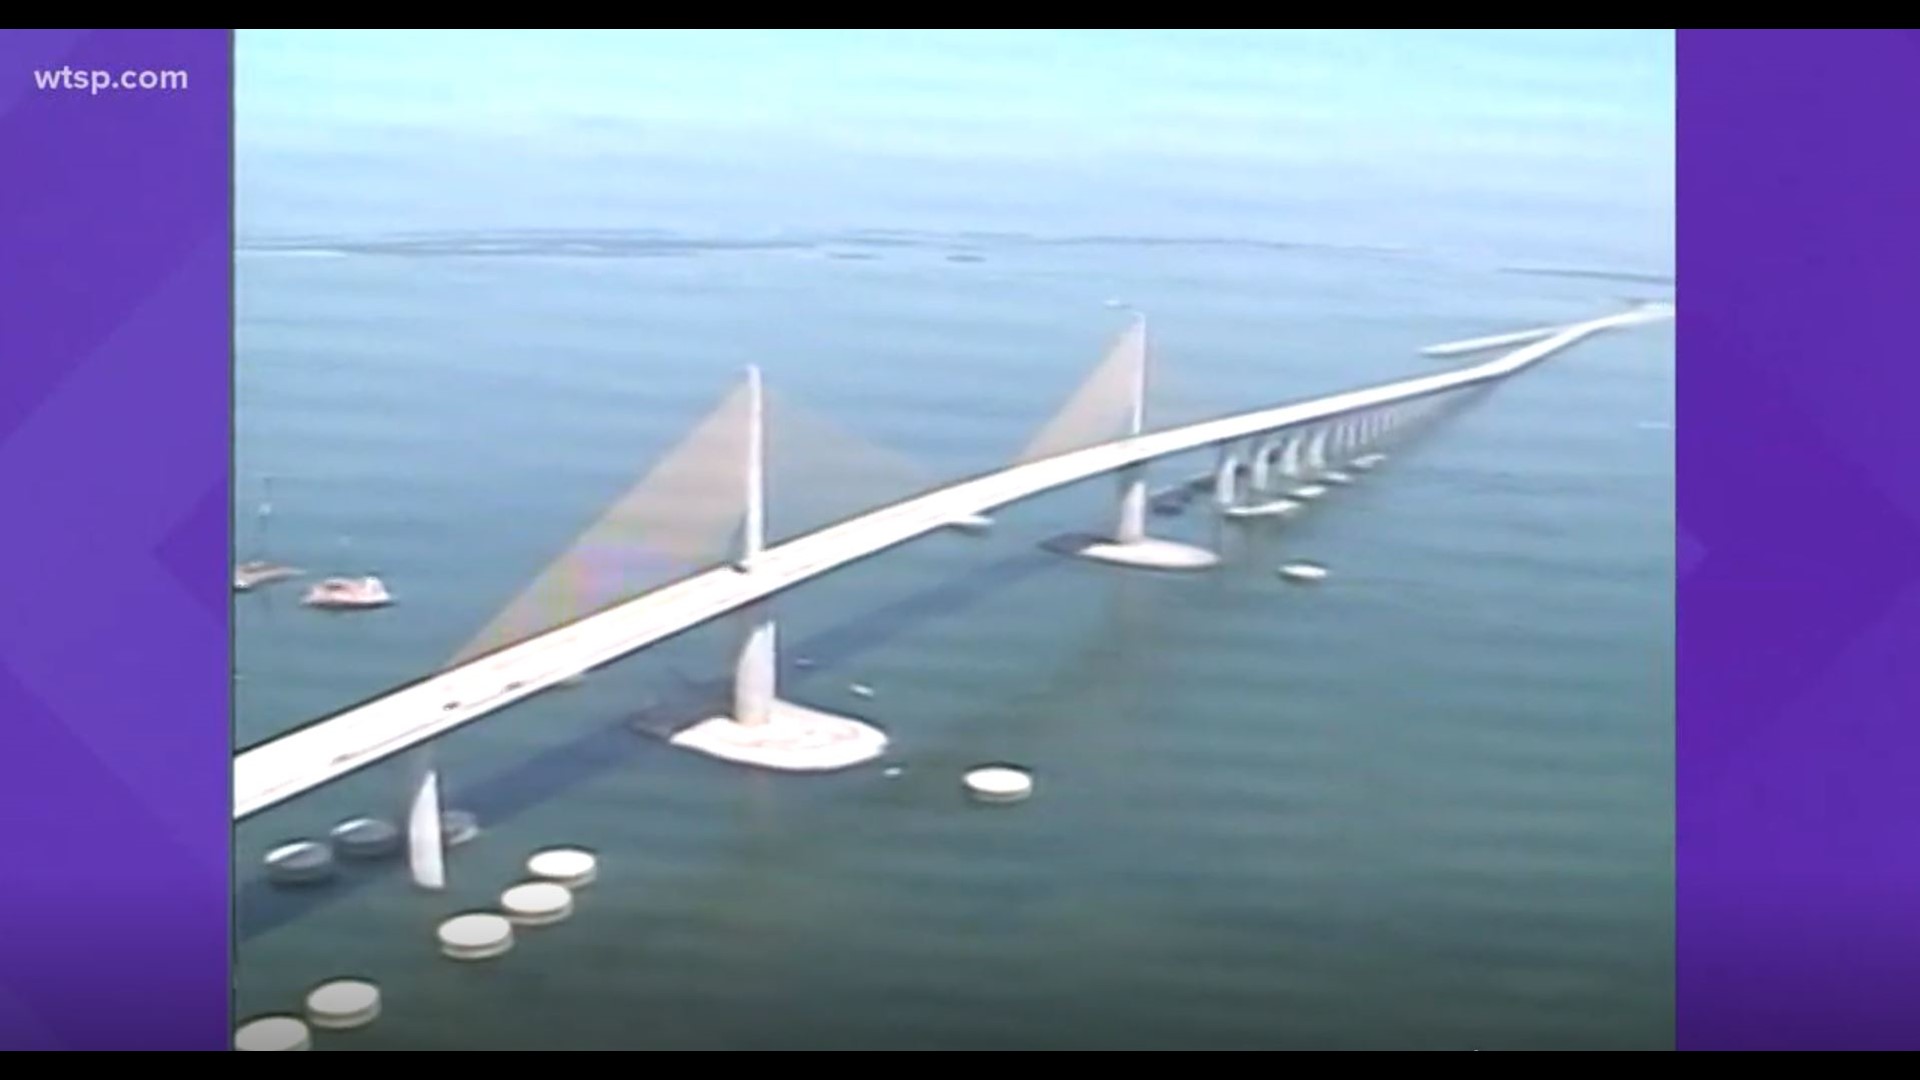 2020 marks the 40 year anniversary of the Skyway bridge collapse